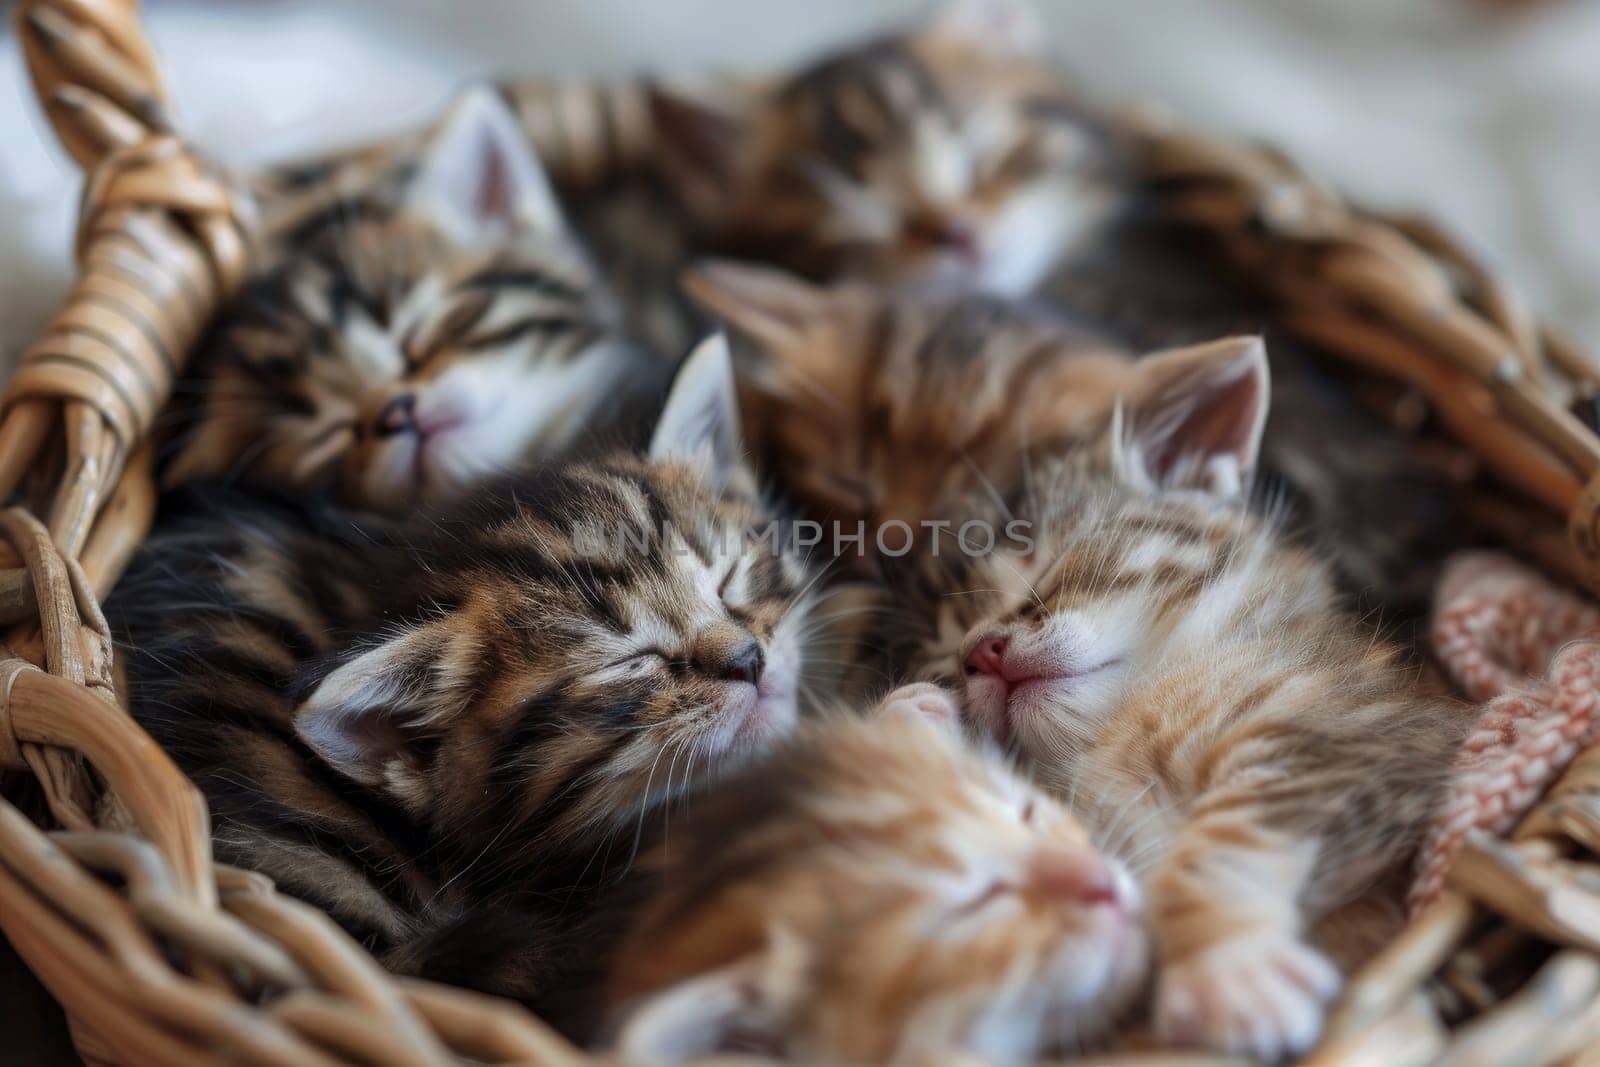 A basket overflowing with fluffy newborn kittens curled up together, fast a sleep